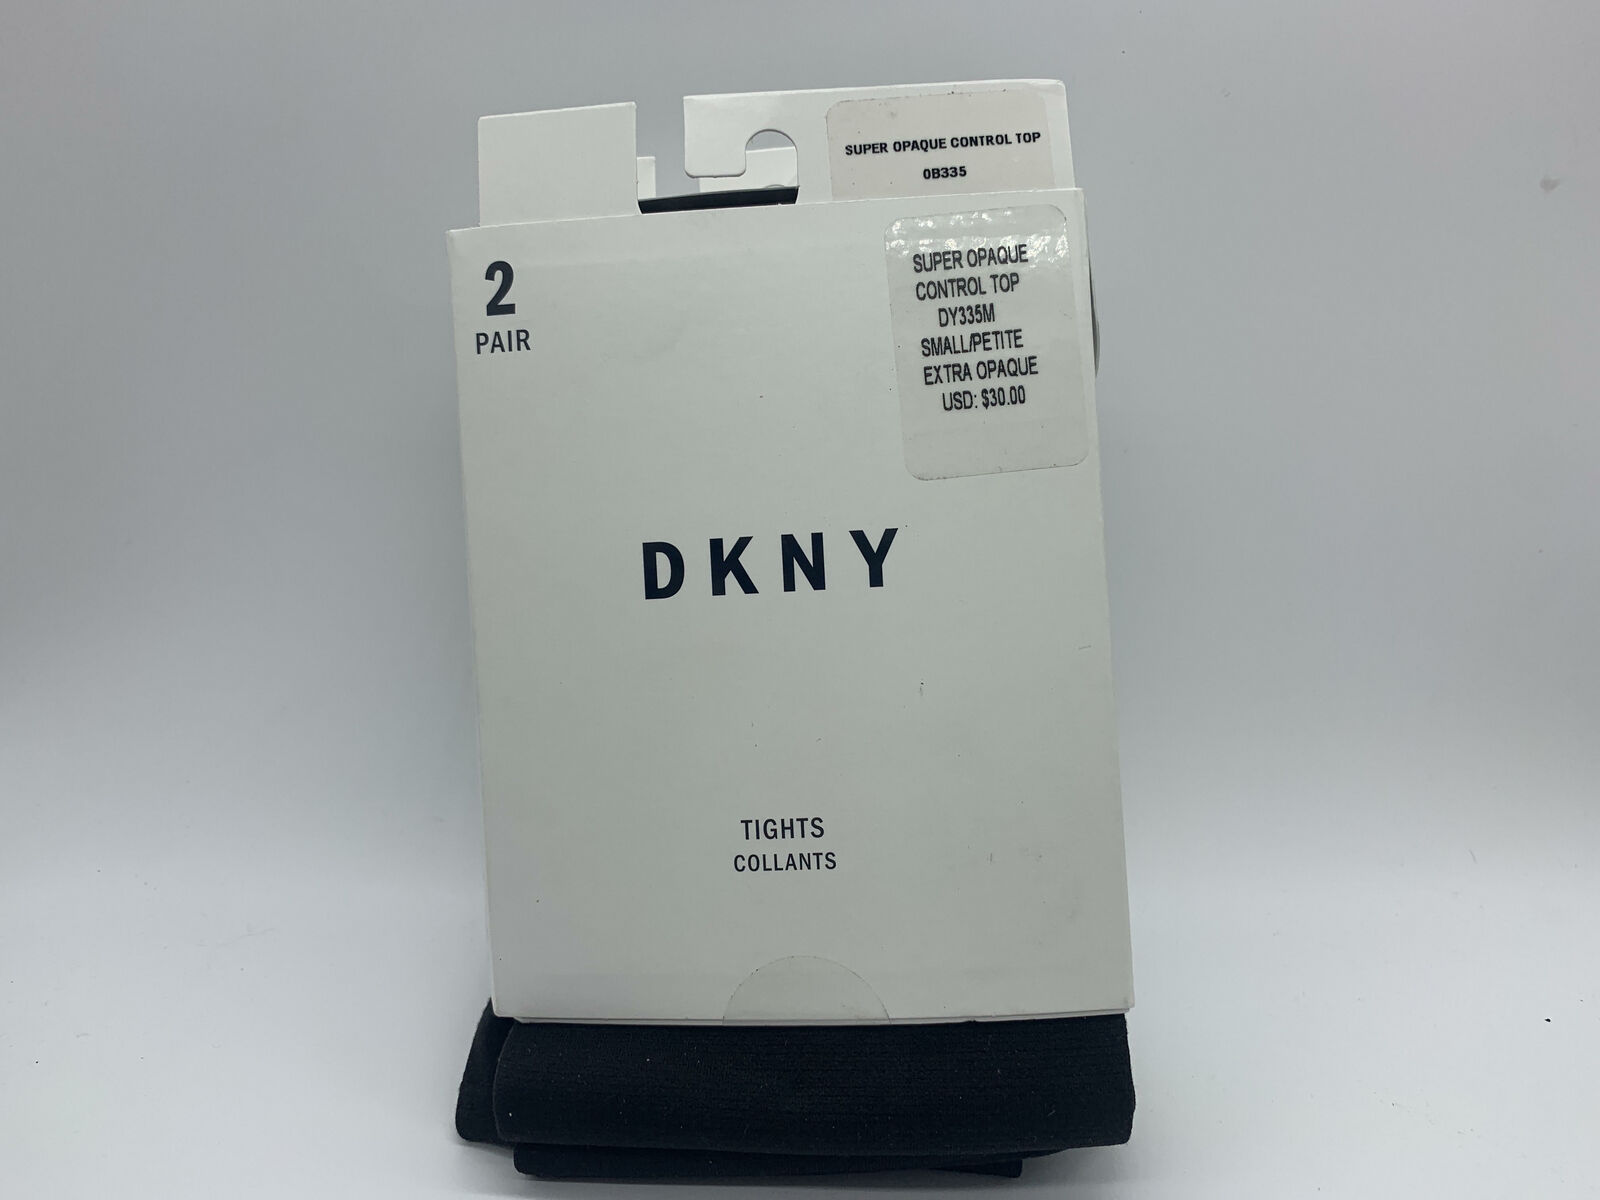 DKNY Super Opaque Control Top Tights - 2 PAIR, Small, DY335M